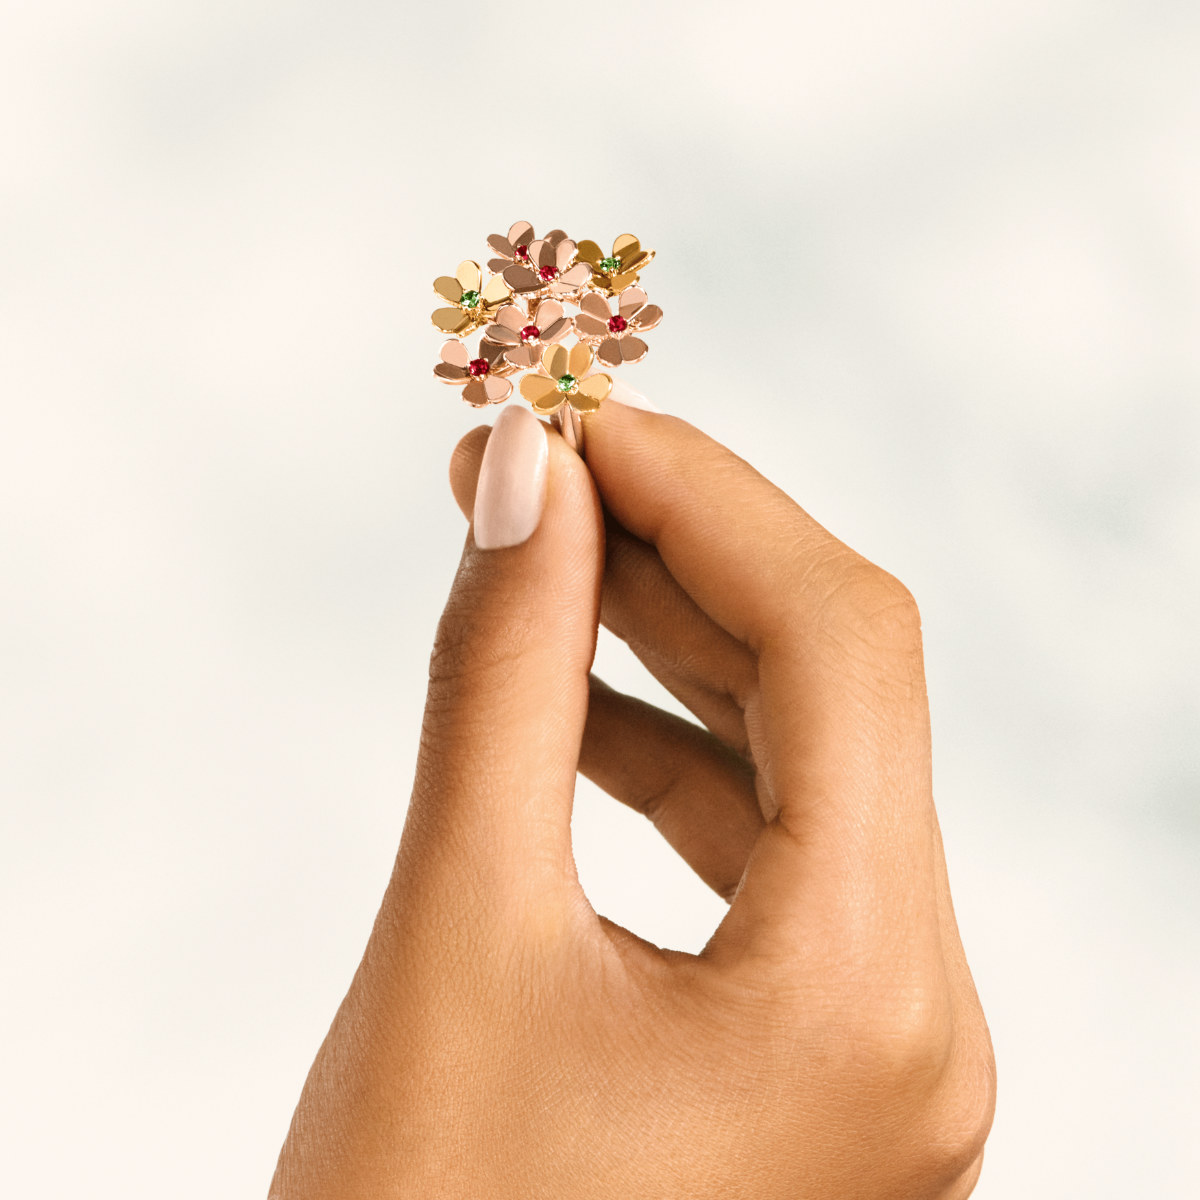 Van Cleef & Arpels Celebrates Spring with Additions to its Frivole